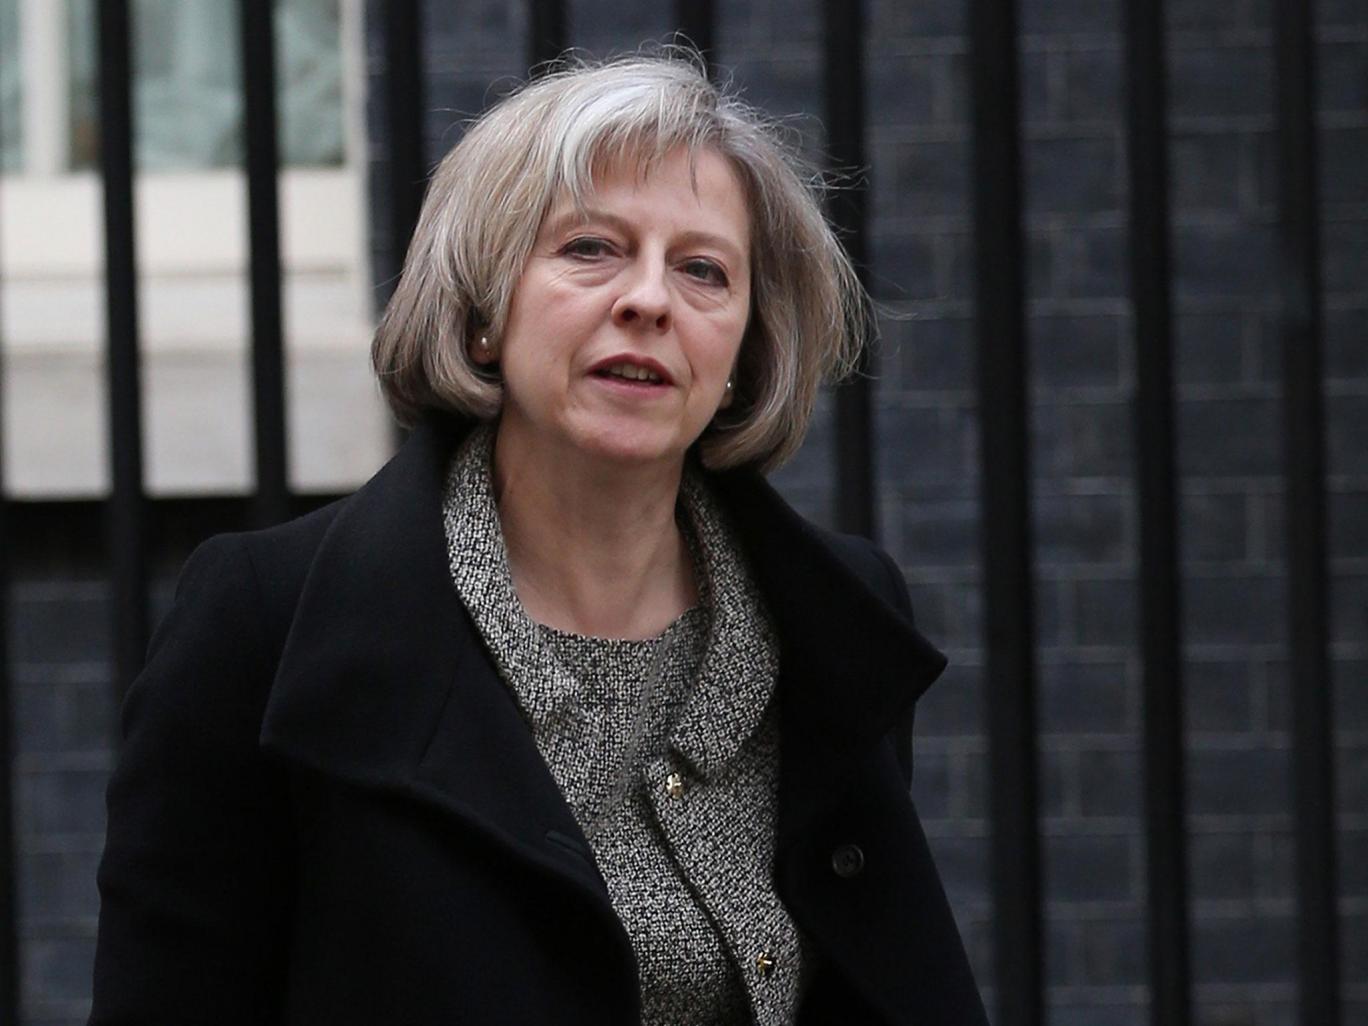 Theresa May becomes prime minister of Britain